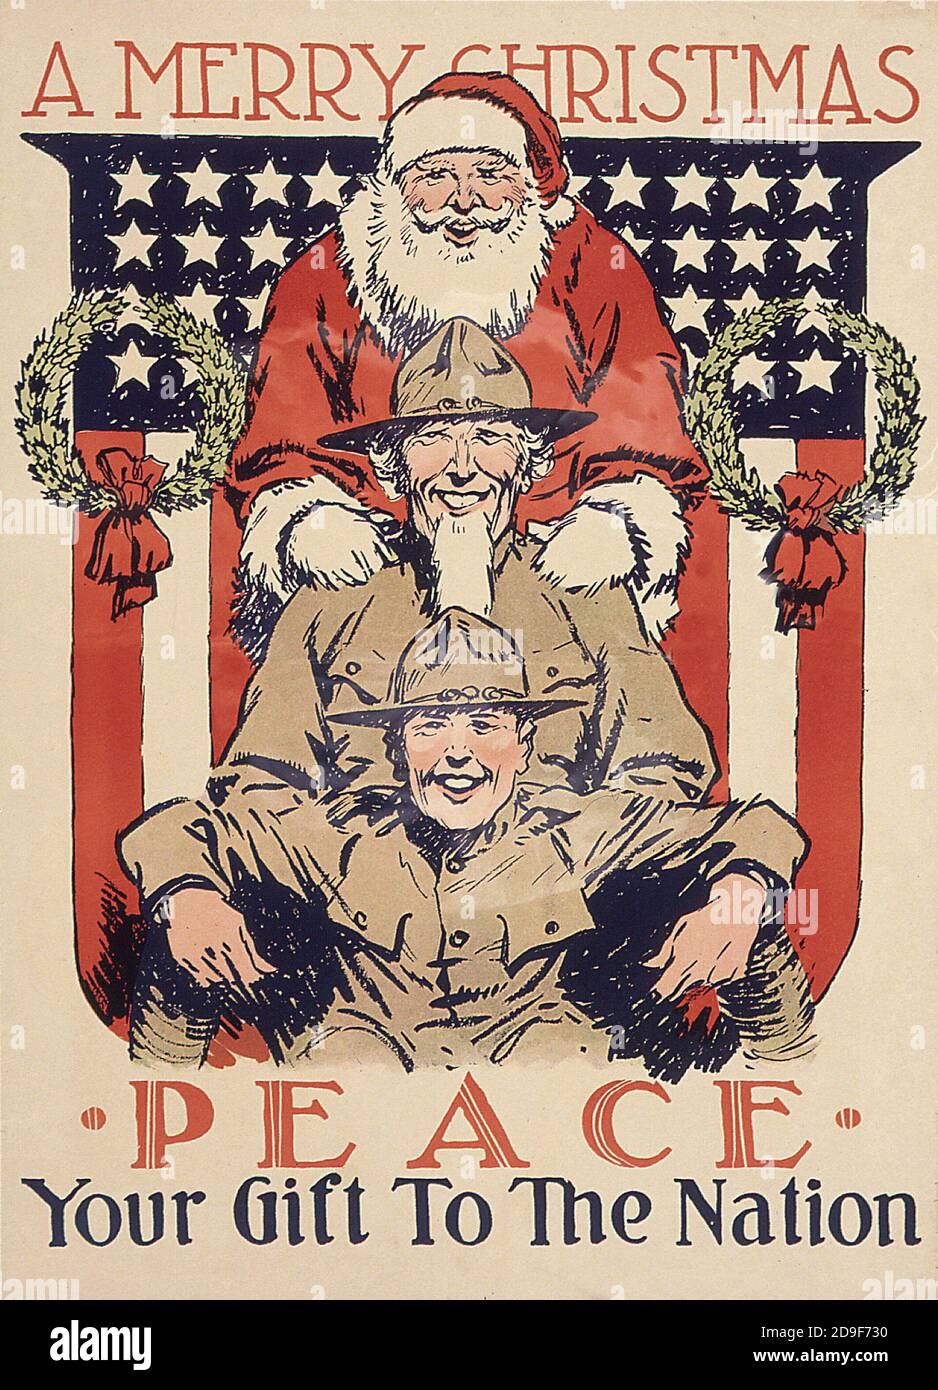 Santa Claus in the US Army. Old style Christmas in a vintage way. Stock Photo